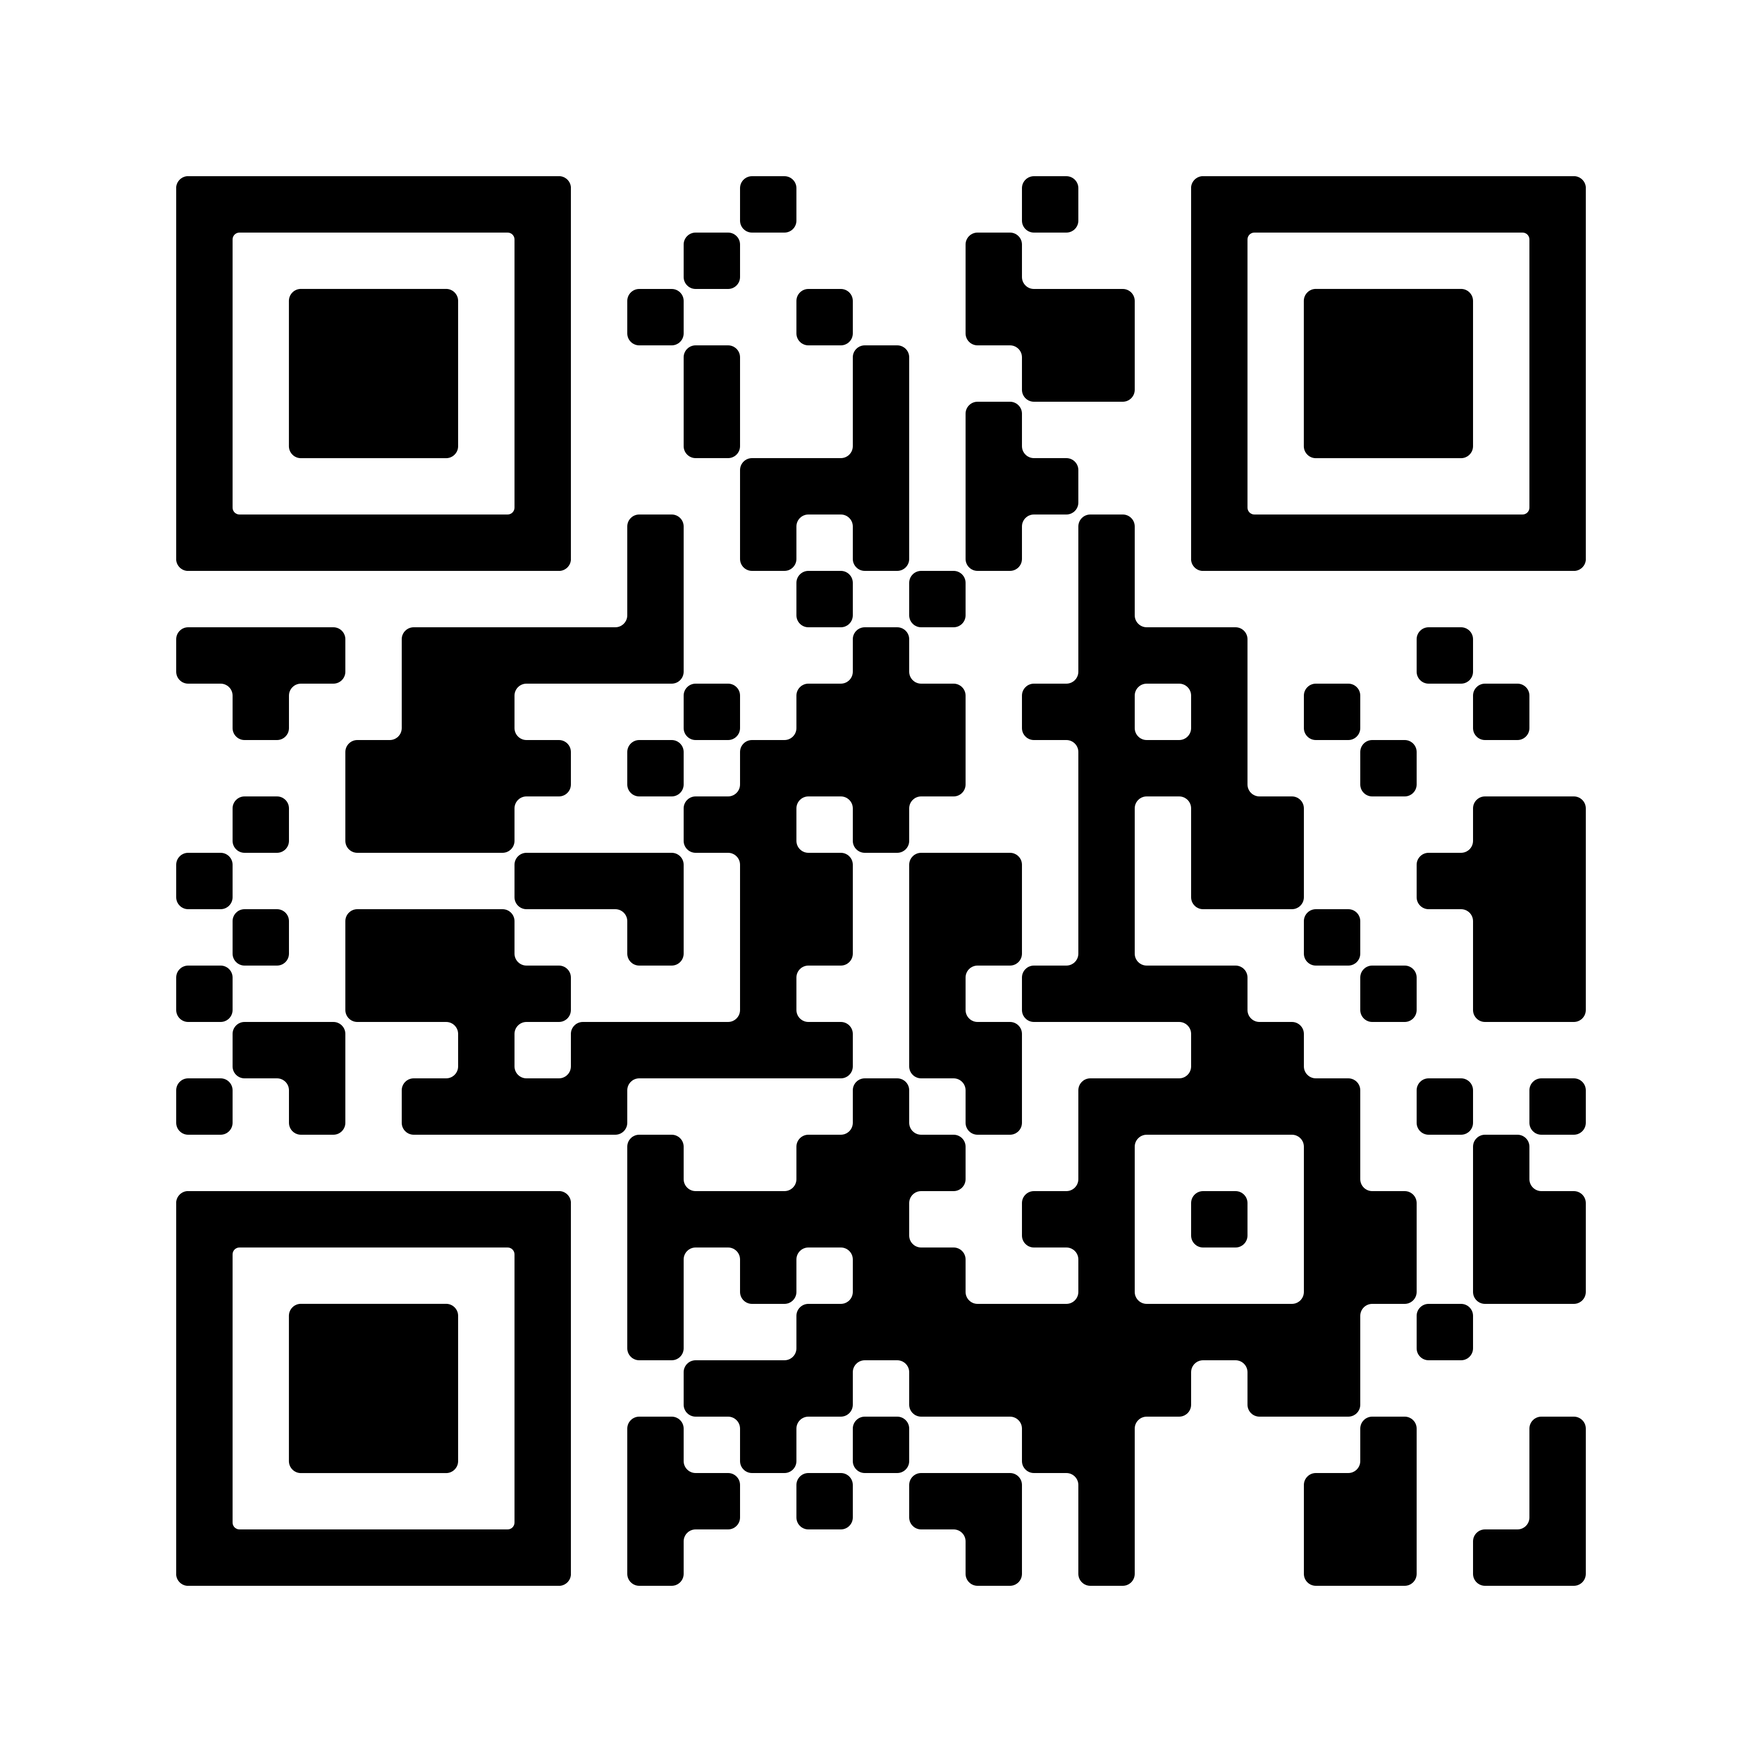 Download the APP today using the QR code in image